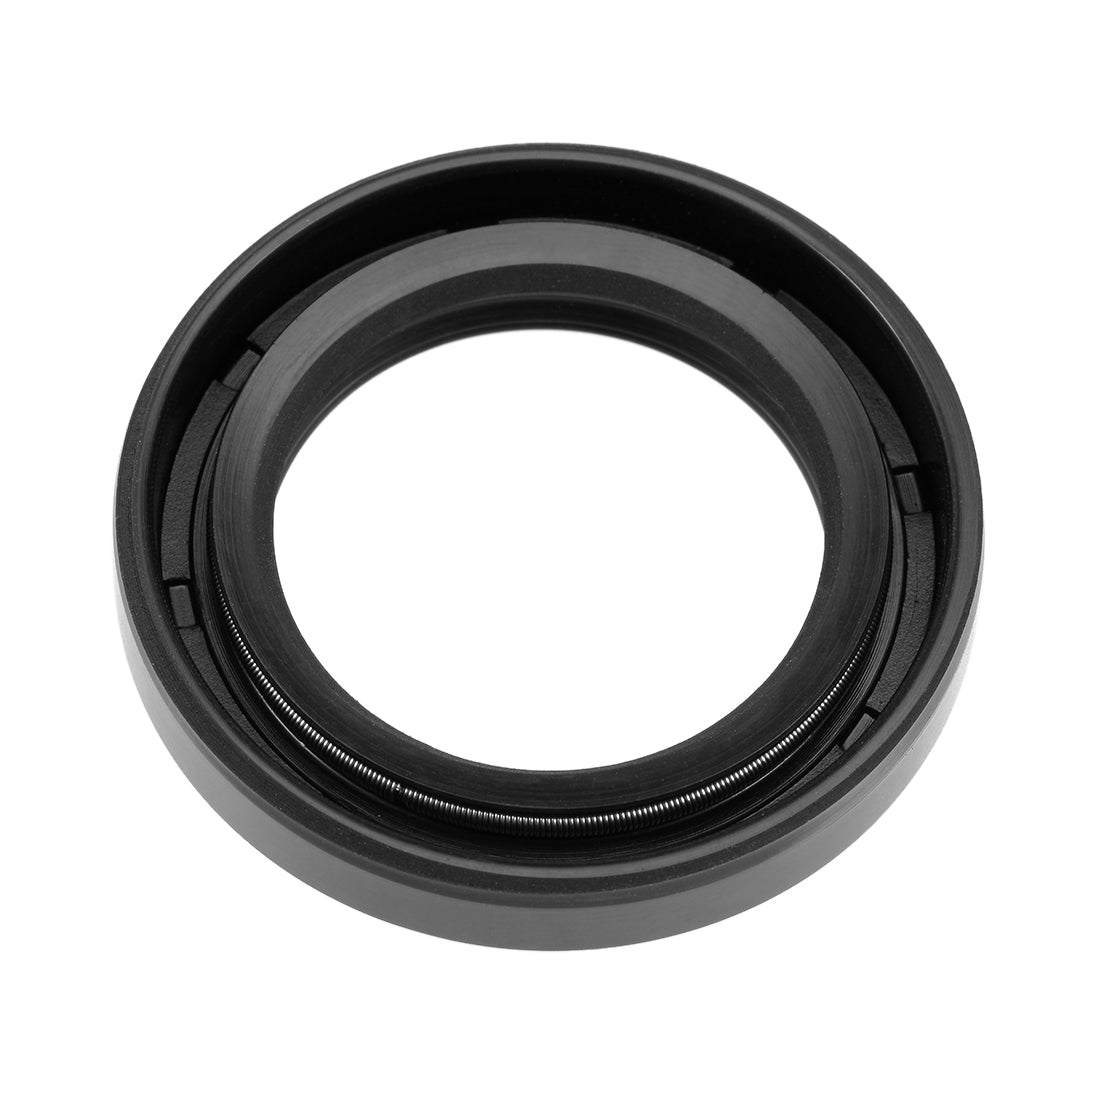 uxcell Uxcell Oil Seal, TC 28mm x 42mm x 7mm, Nitrile Rubber Cover Double Lip